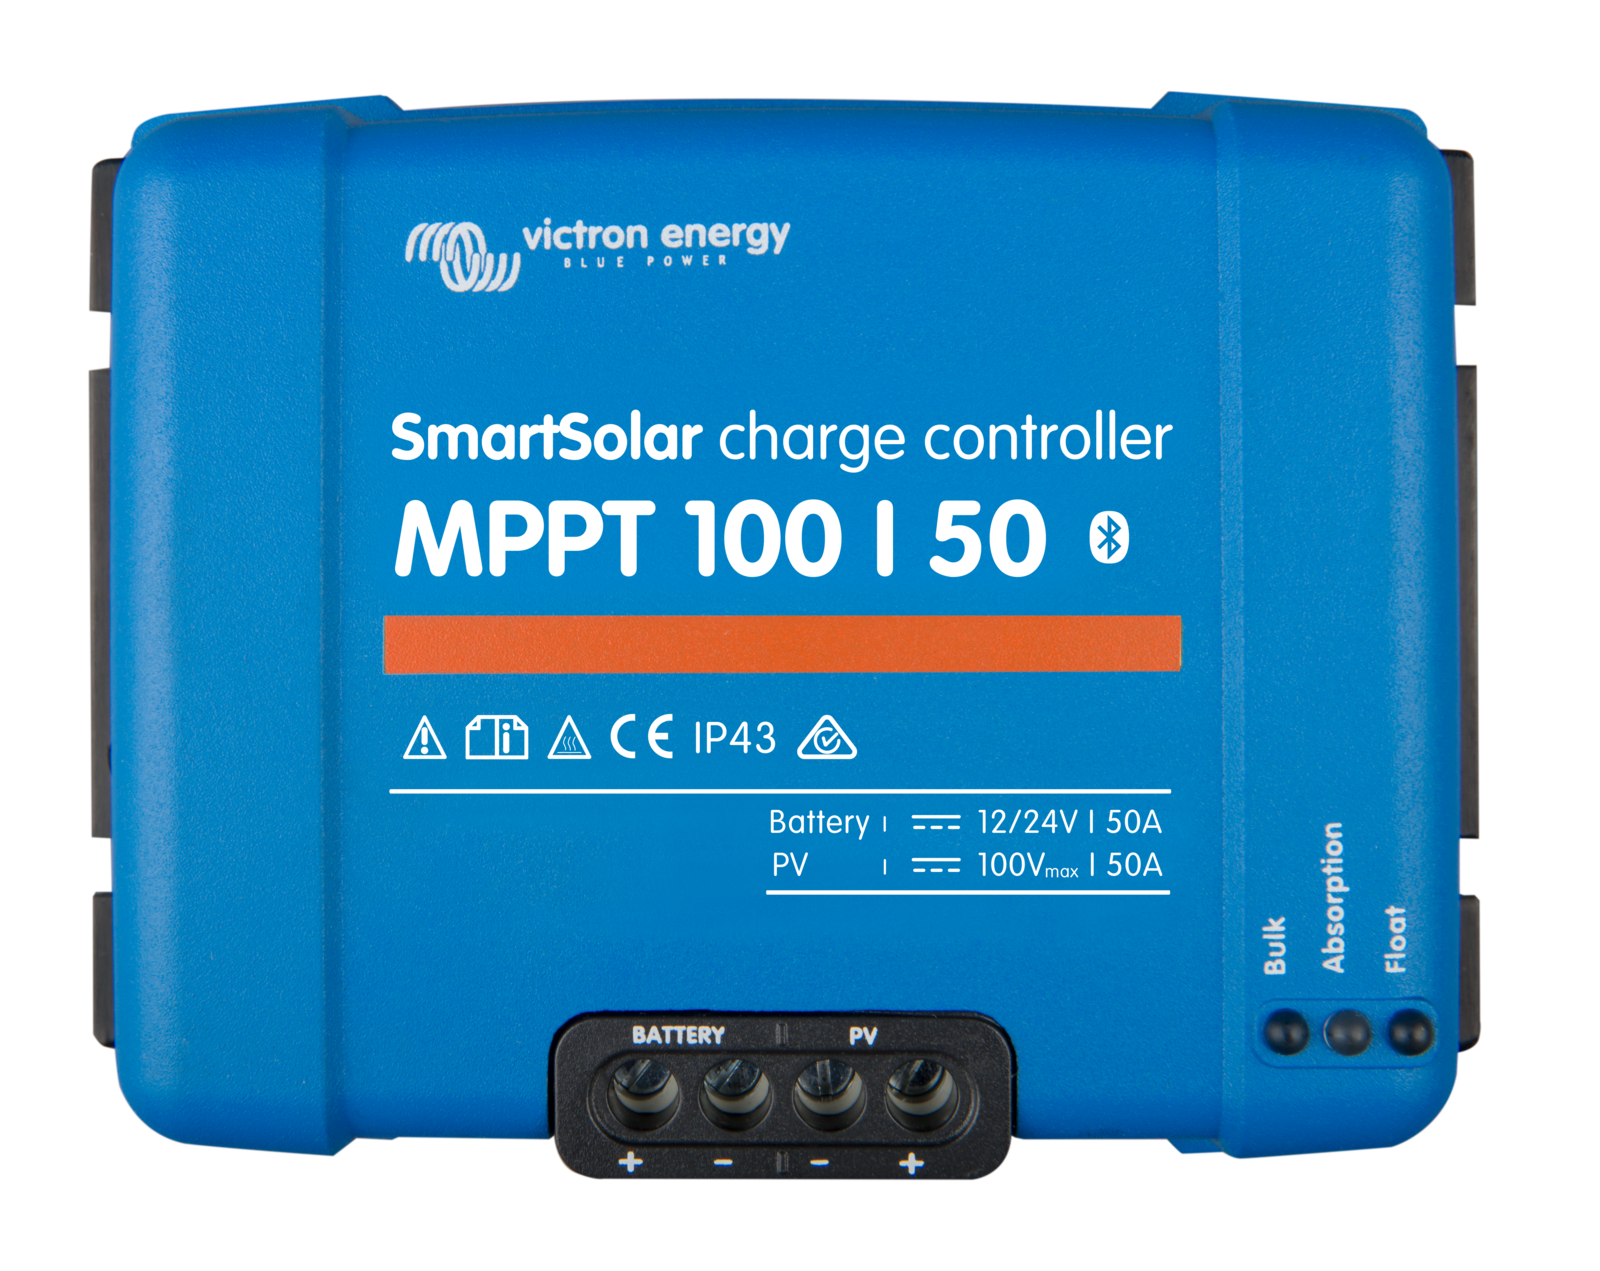 Victron SmartSolar MPPT 100/50 (12/24-50A) Bluetooth Solar Charge Controller